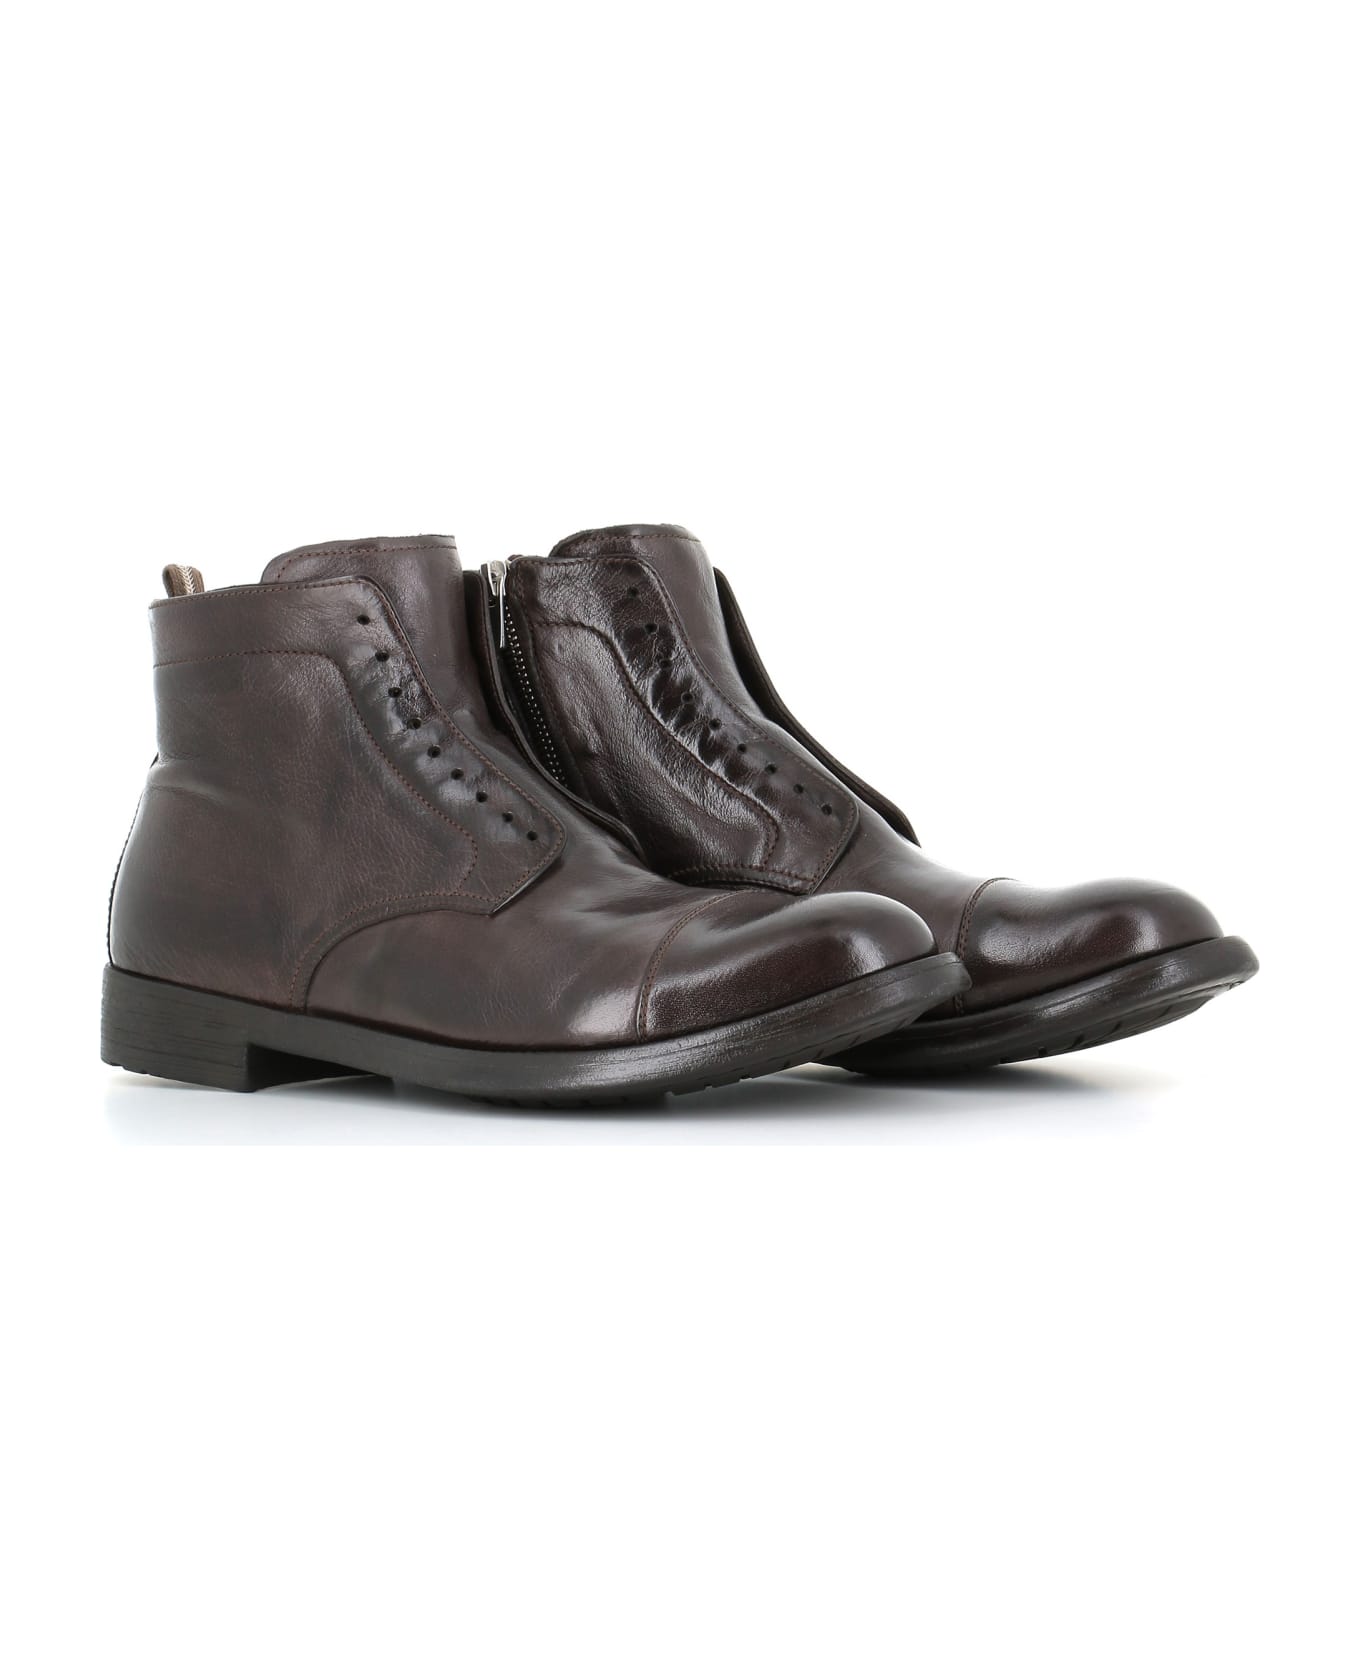 Officine Creative Lace-up Boot Hive/005 - Ebony